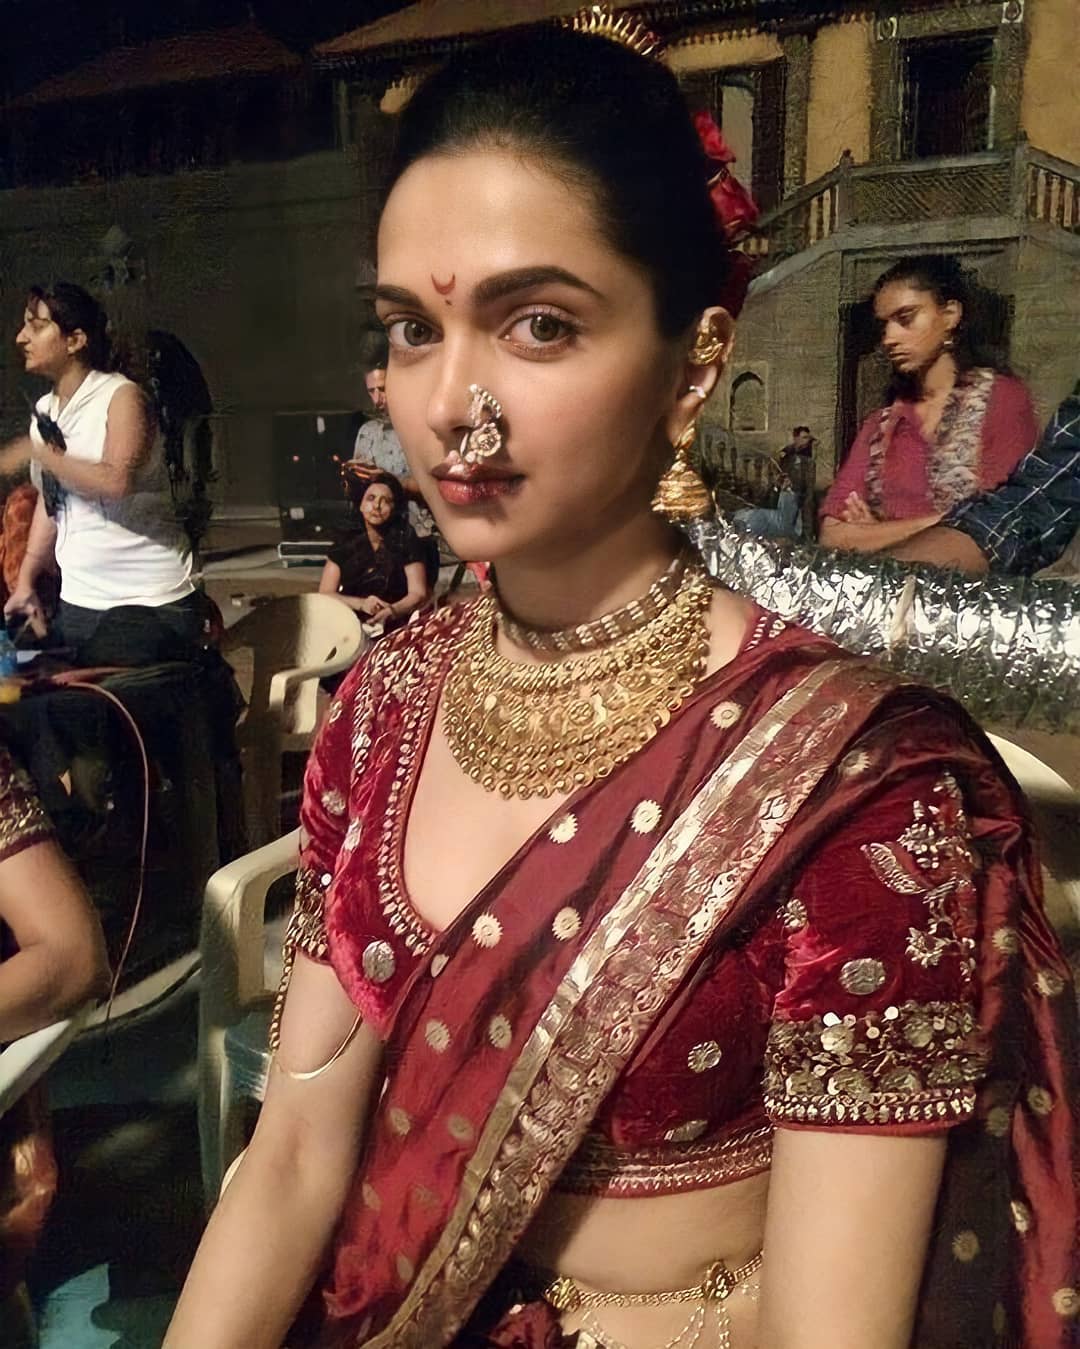 Bride Dressed Up As 'Manikarnika' For Her Wedding While Her Groom Opted For  'Bajirao' Inspired Look